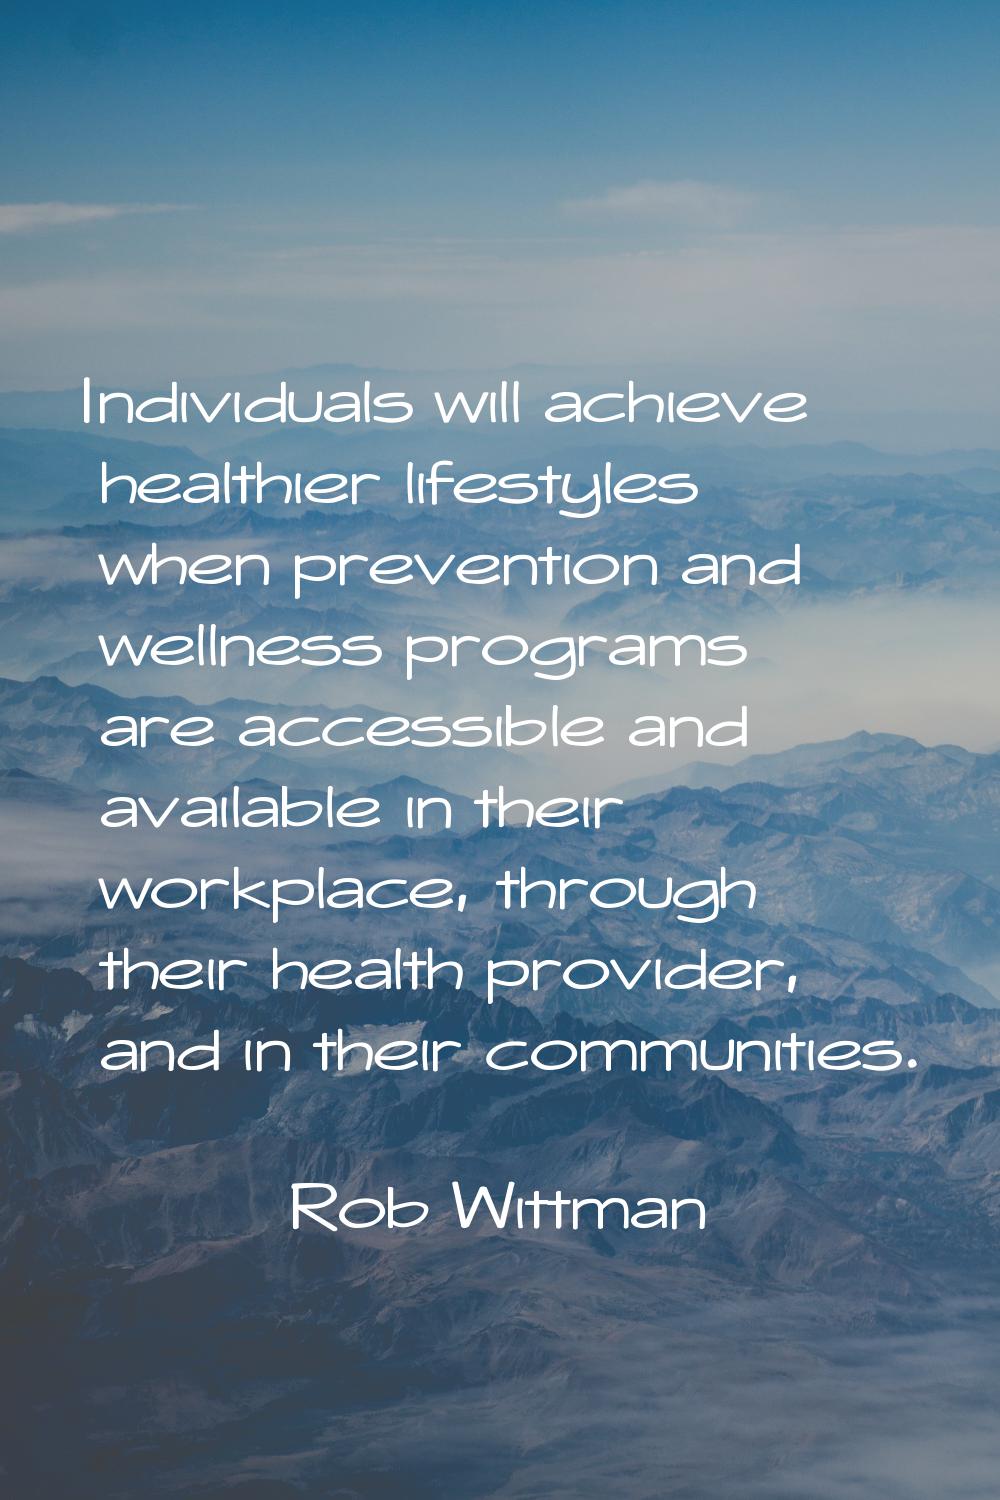 Individuals will achieve healthier lifestyles when prevention and wellness programs are accessible 